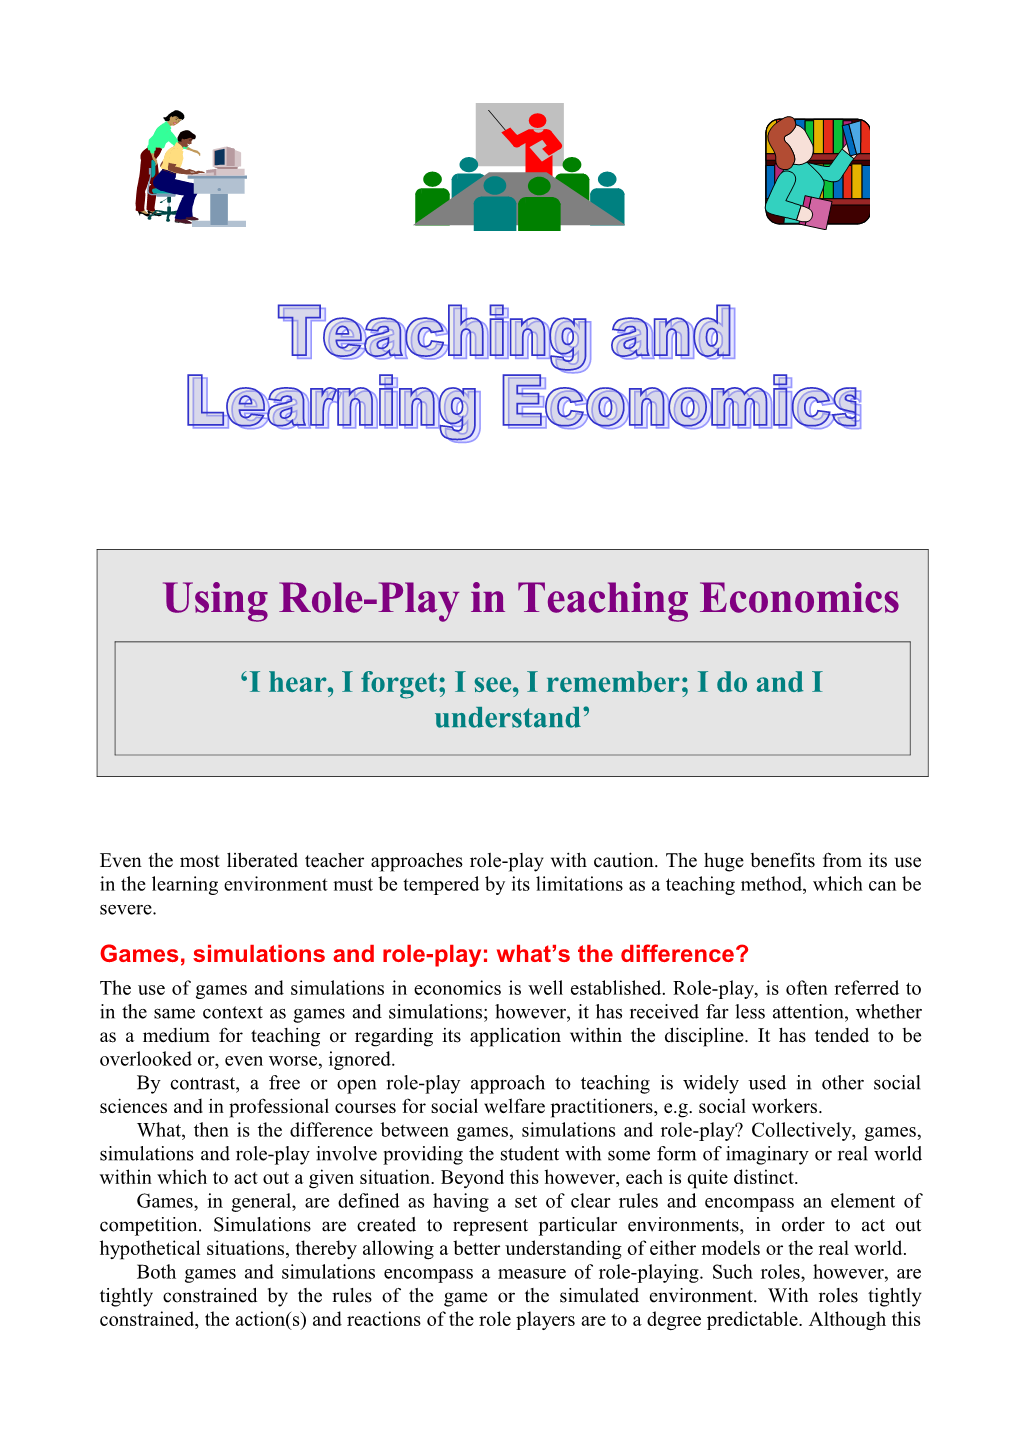 Using Role-Play in Teaching Economics